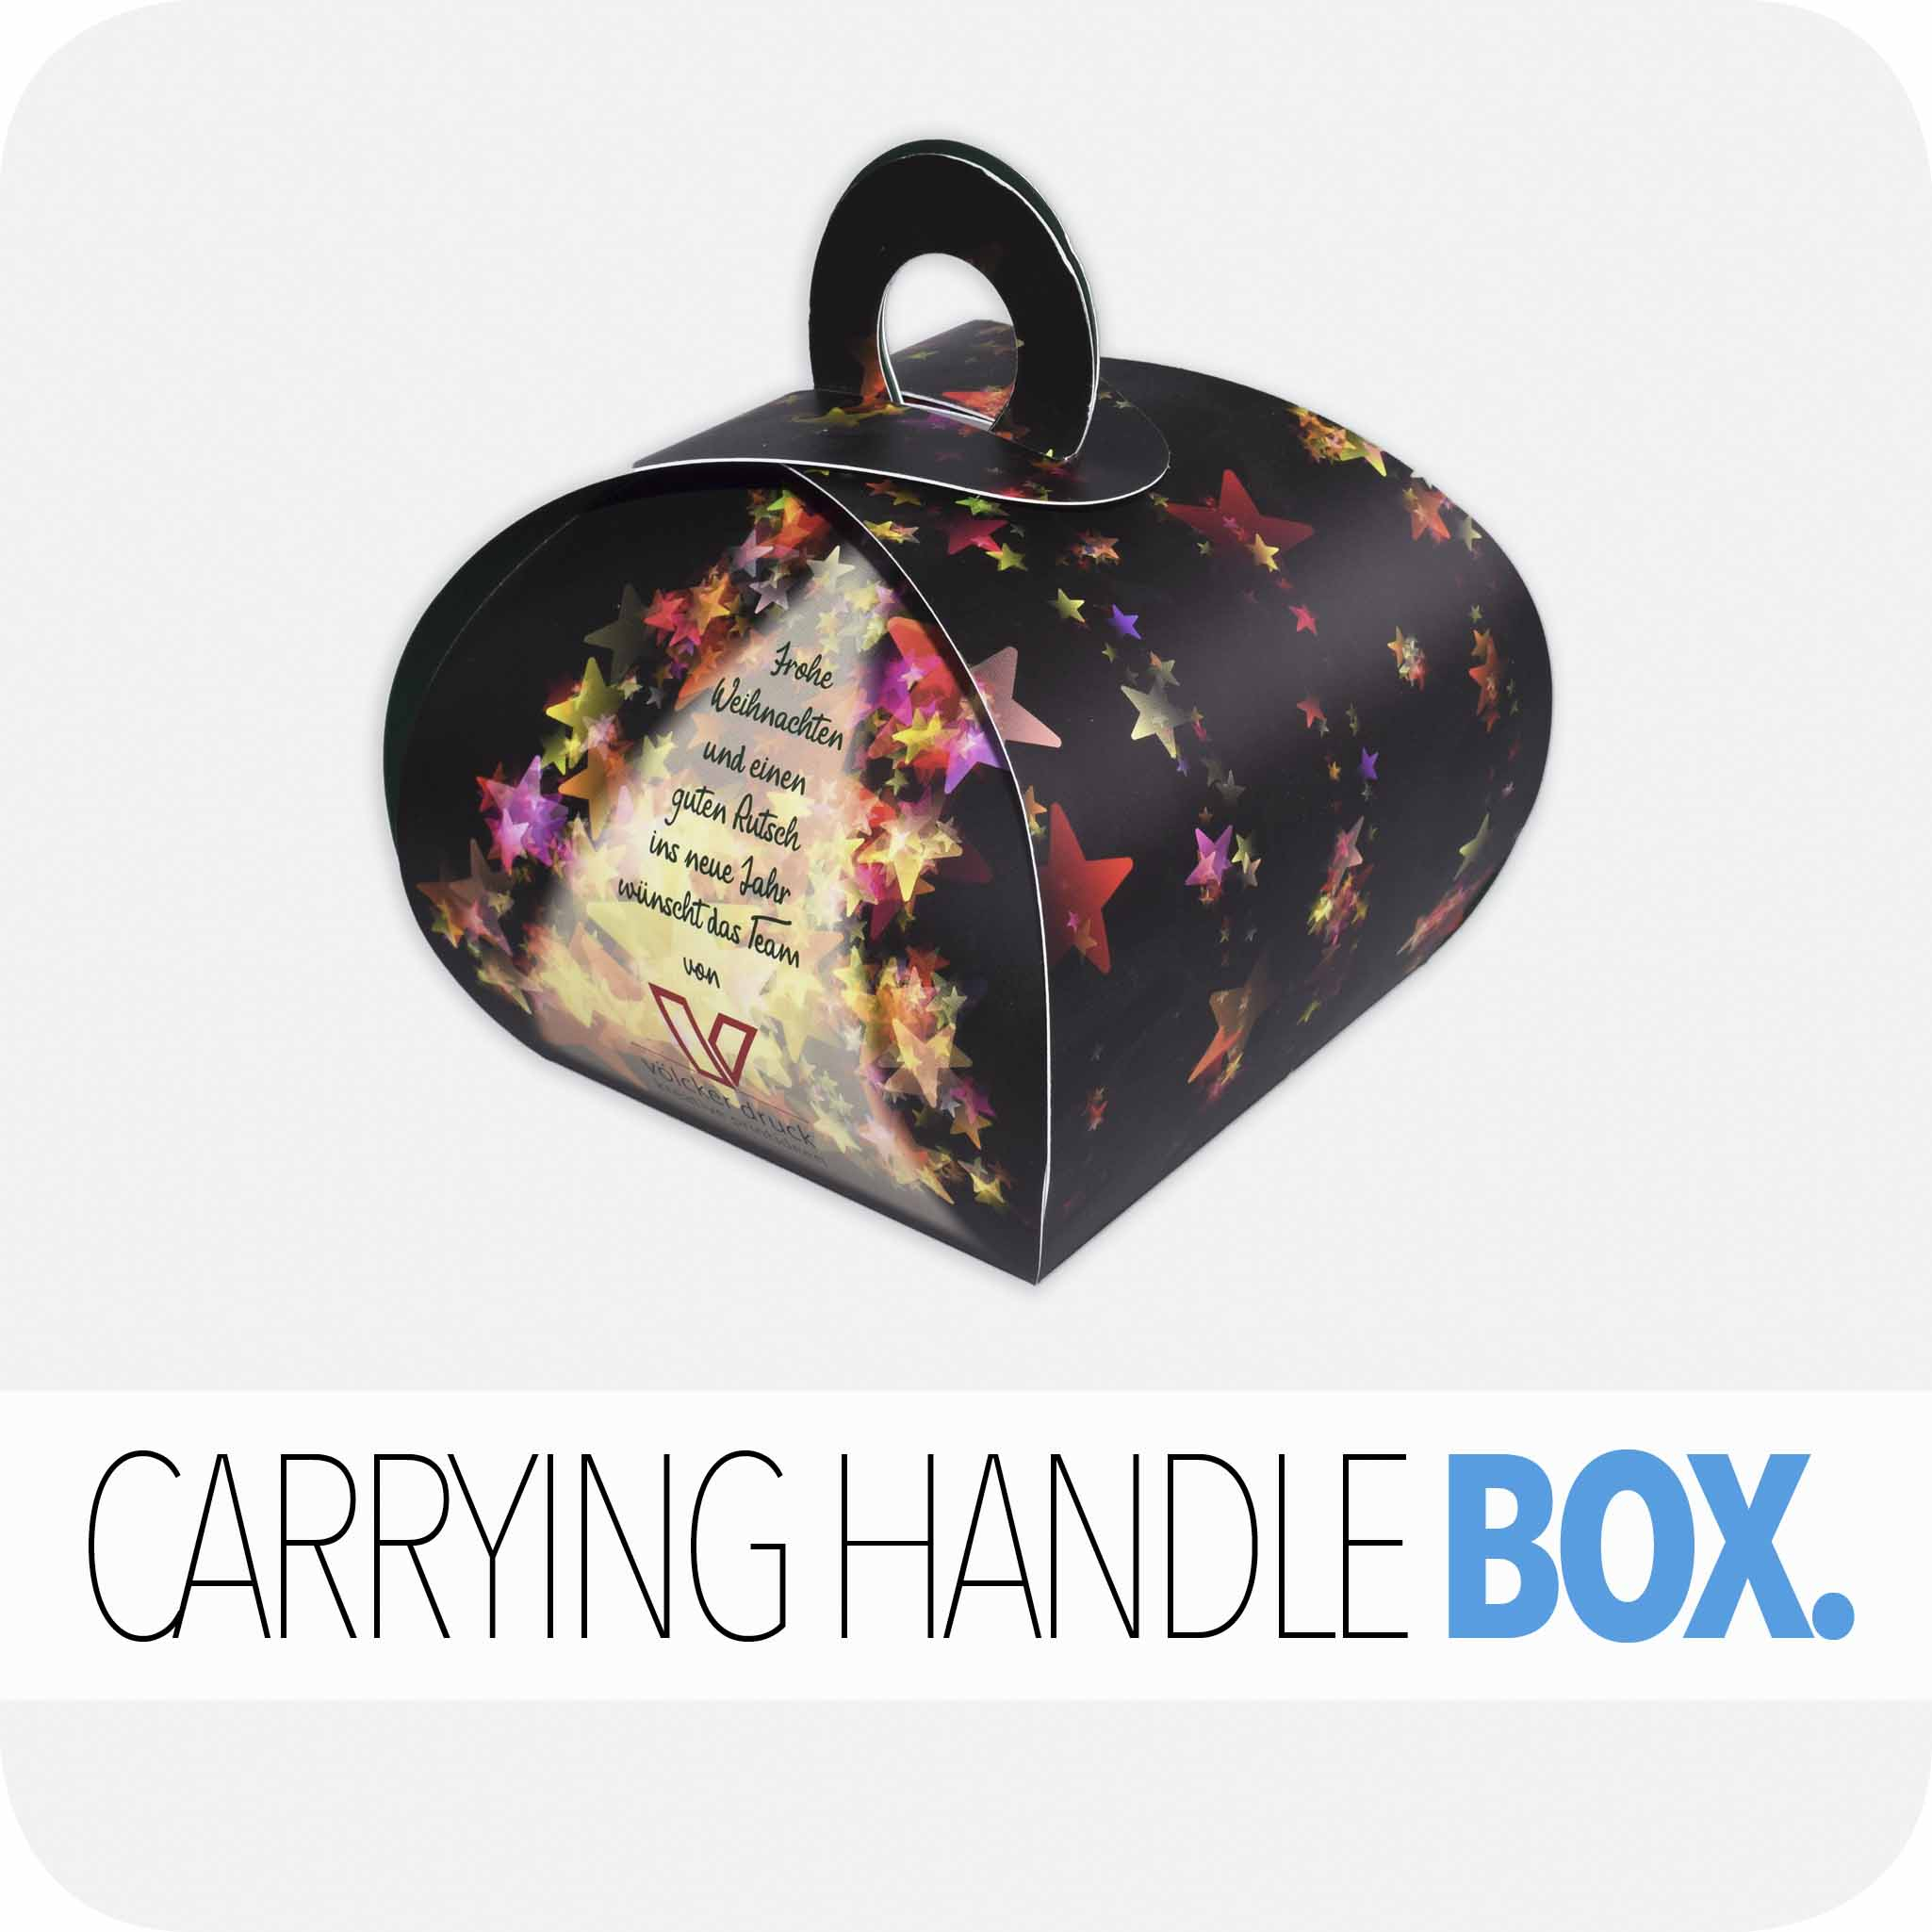 Carrying handle box